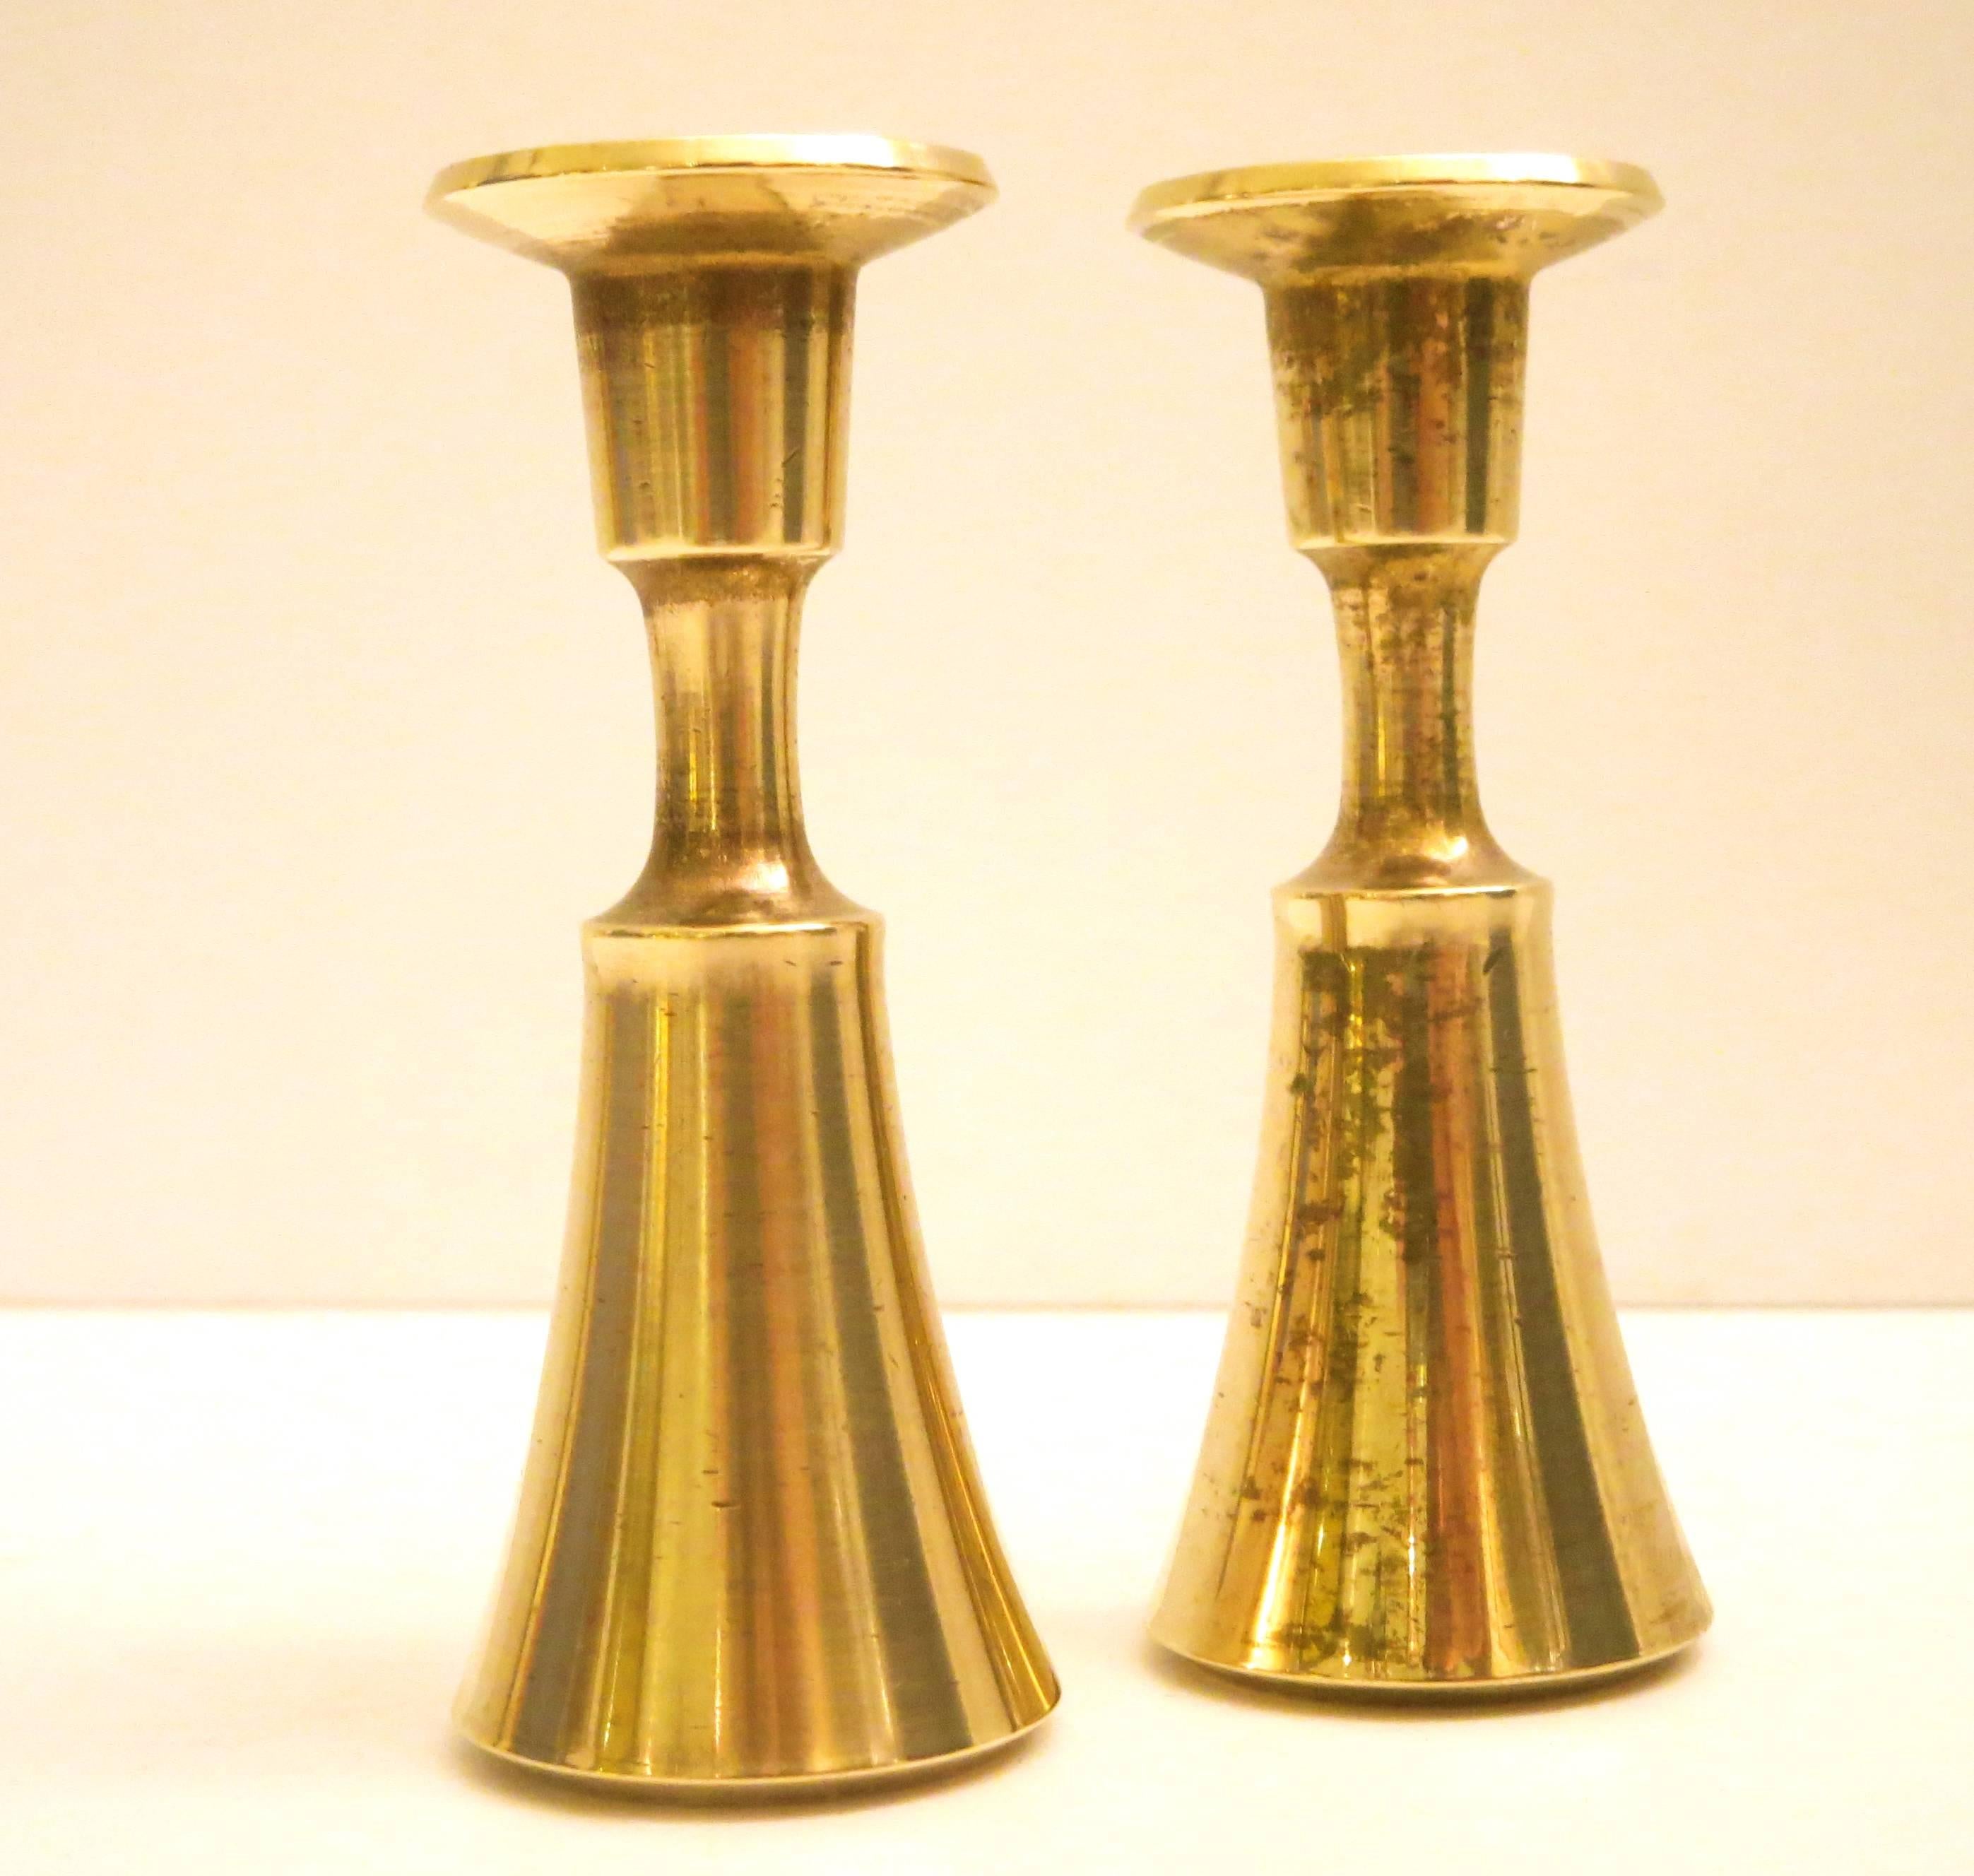 Nice set of small candle holders designed by Quistgaard for Dansk, early production, nice polished brass that fits long skinny tapper candles, great and simple design, nice and heavy stamped at the bottom nice light patina that can be polished, to